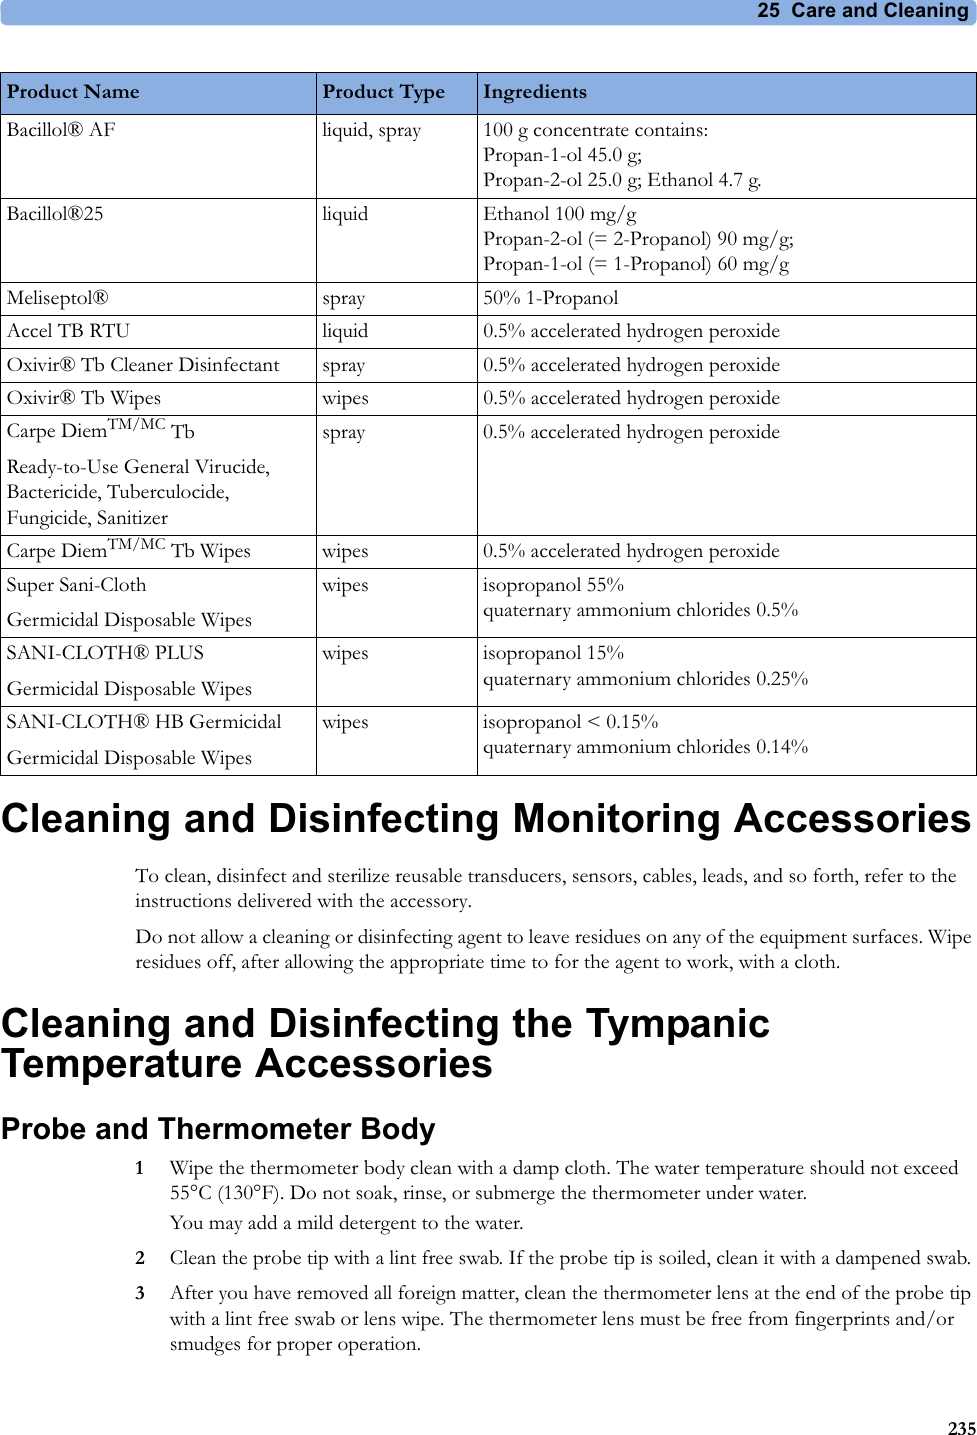 25  Care and Cleaning235Cleaning and Disinfecting Monitoring AccessoriesTo clean, disinfect and sterilize reusable transducers, sensors, cables, leads, and so forth, refer to the instructions delivered with the accessory.Do not allow a cleaning or disinfecting agent to leave residues on any of the equipment surfaces. Wipe residues off, after allowing the appropriate time to for the agent to work, with a cloth.Cleaning and Disinfecting the Tympanic Temperature AccessoriesProbe and Thermometer Body1Wipe the thermometer body clean with a damp cloth. The water temperature should not exceed 55°C (130°F). Do not soak, rinse, or submerge the thermometer under water.You may add a mild detergent to the water.2Clean the probe tip with a lint free swab. If the probe tip is soiled, clean it with a dampened swab. 3After you have removed all foreign matter, clean the thermometer lens at the end of the probe tip with a lint free swab or lens wipe. The thermometer lens must be free from fingerprints and/or smudges for proper operation.Bacillol® AF liquid, spray 100 g concentrate contains: Propan-1-ol 45.0 g; Propan-2-ol 25.0 g; Ethanol 4.7 g.Bacillol®25 liquid Ethanol 100 mg/g Propan-2-ol (= 2-Propanol) 90 mg/g; Propan-1-ol (= 1-Propanol) 60 mg/gMeliseptol® spray 50% 1-PropanolAccel TB RTU liquid 0.5% accelerated hydrogen peroxideOxivir® Tb Cleaner Disinfectant spray 0.5% accelerated hydrogen peroxideOxivir® Tb Wipes wipes 0.5% accelerated hydrogen peroxideCarpe DiemTM/MC TbReady-to-Use General Virucide, Bactericide, Tuberculocide, Fungicide, Sanitizerspray 0.5% accelerated hydrogen peroxideCarpe DiemTM/MC Tb Wipes wipes 0.5% accelerated hydrogen peroxideSuper Sani-ClothGermicidal Disposable Wipeswipes isopropanol 55% quaternary ammonium chlorides 0.5%SANI-CLOTH® PLUSGermicidal Disposable Wipeswipes isopropanol 15% quaternary ammonium chlorides 0.25%SANI-CLOTH® HB GermicidalGermicidal Disposable Wipeswipes isopropanol &lt; 0.15% quaternary ammonium chlorides 0.14%Product Name Product Type Ingredients